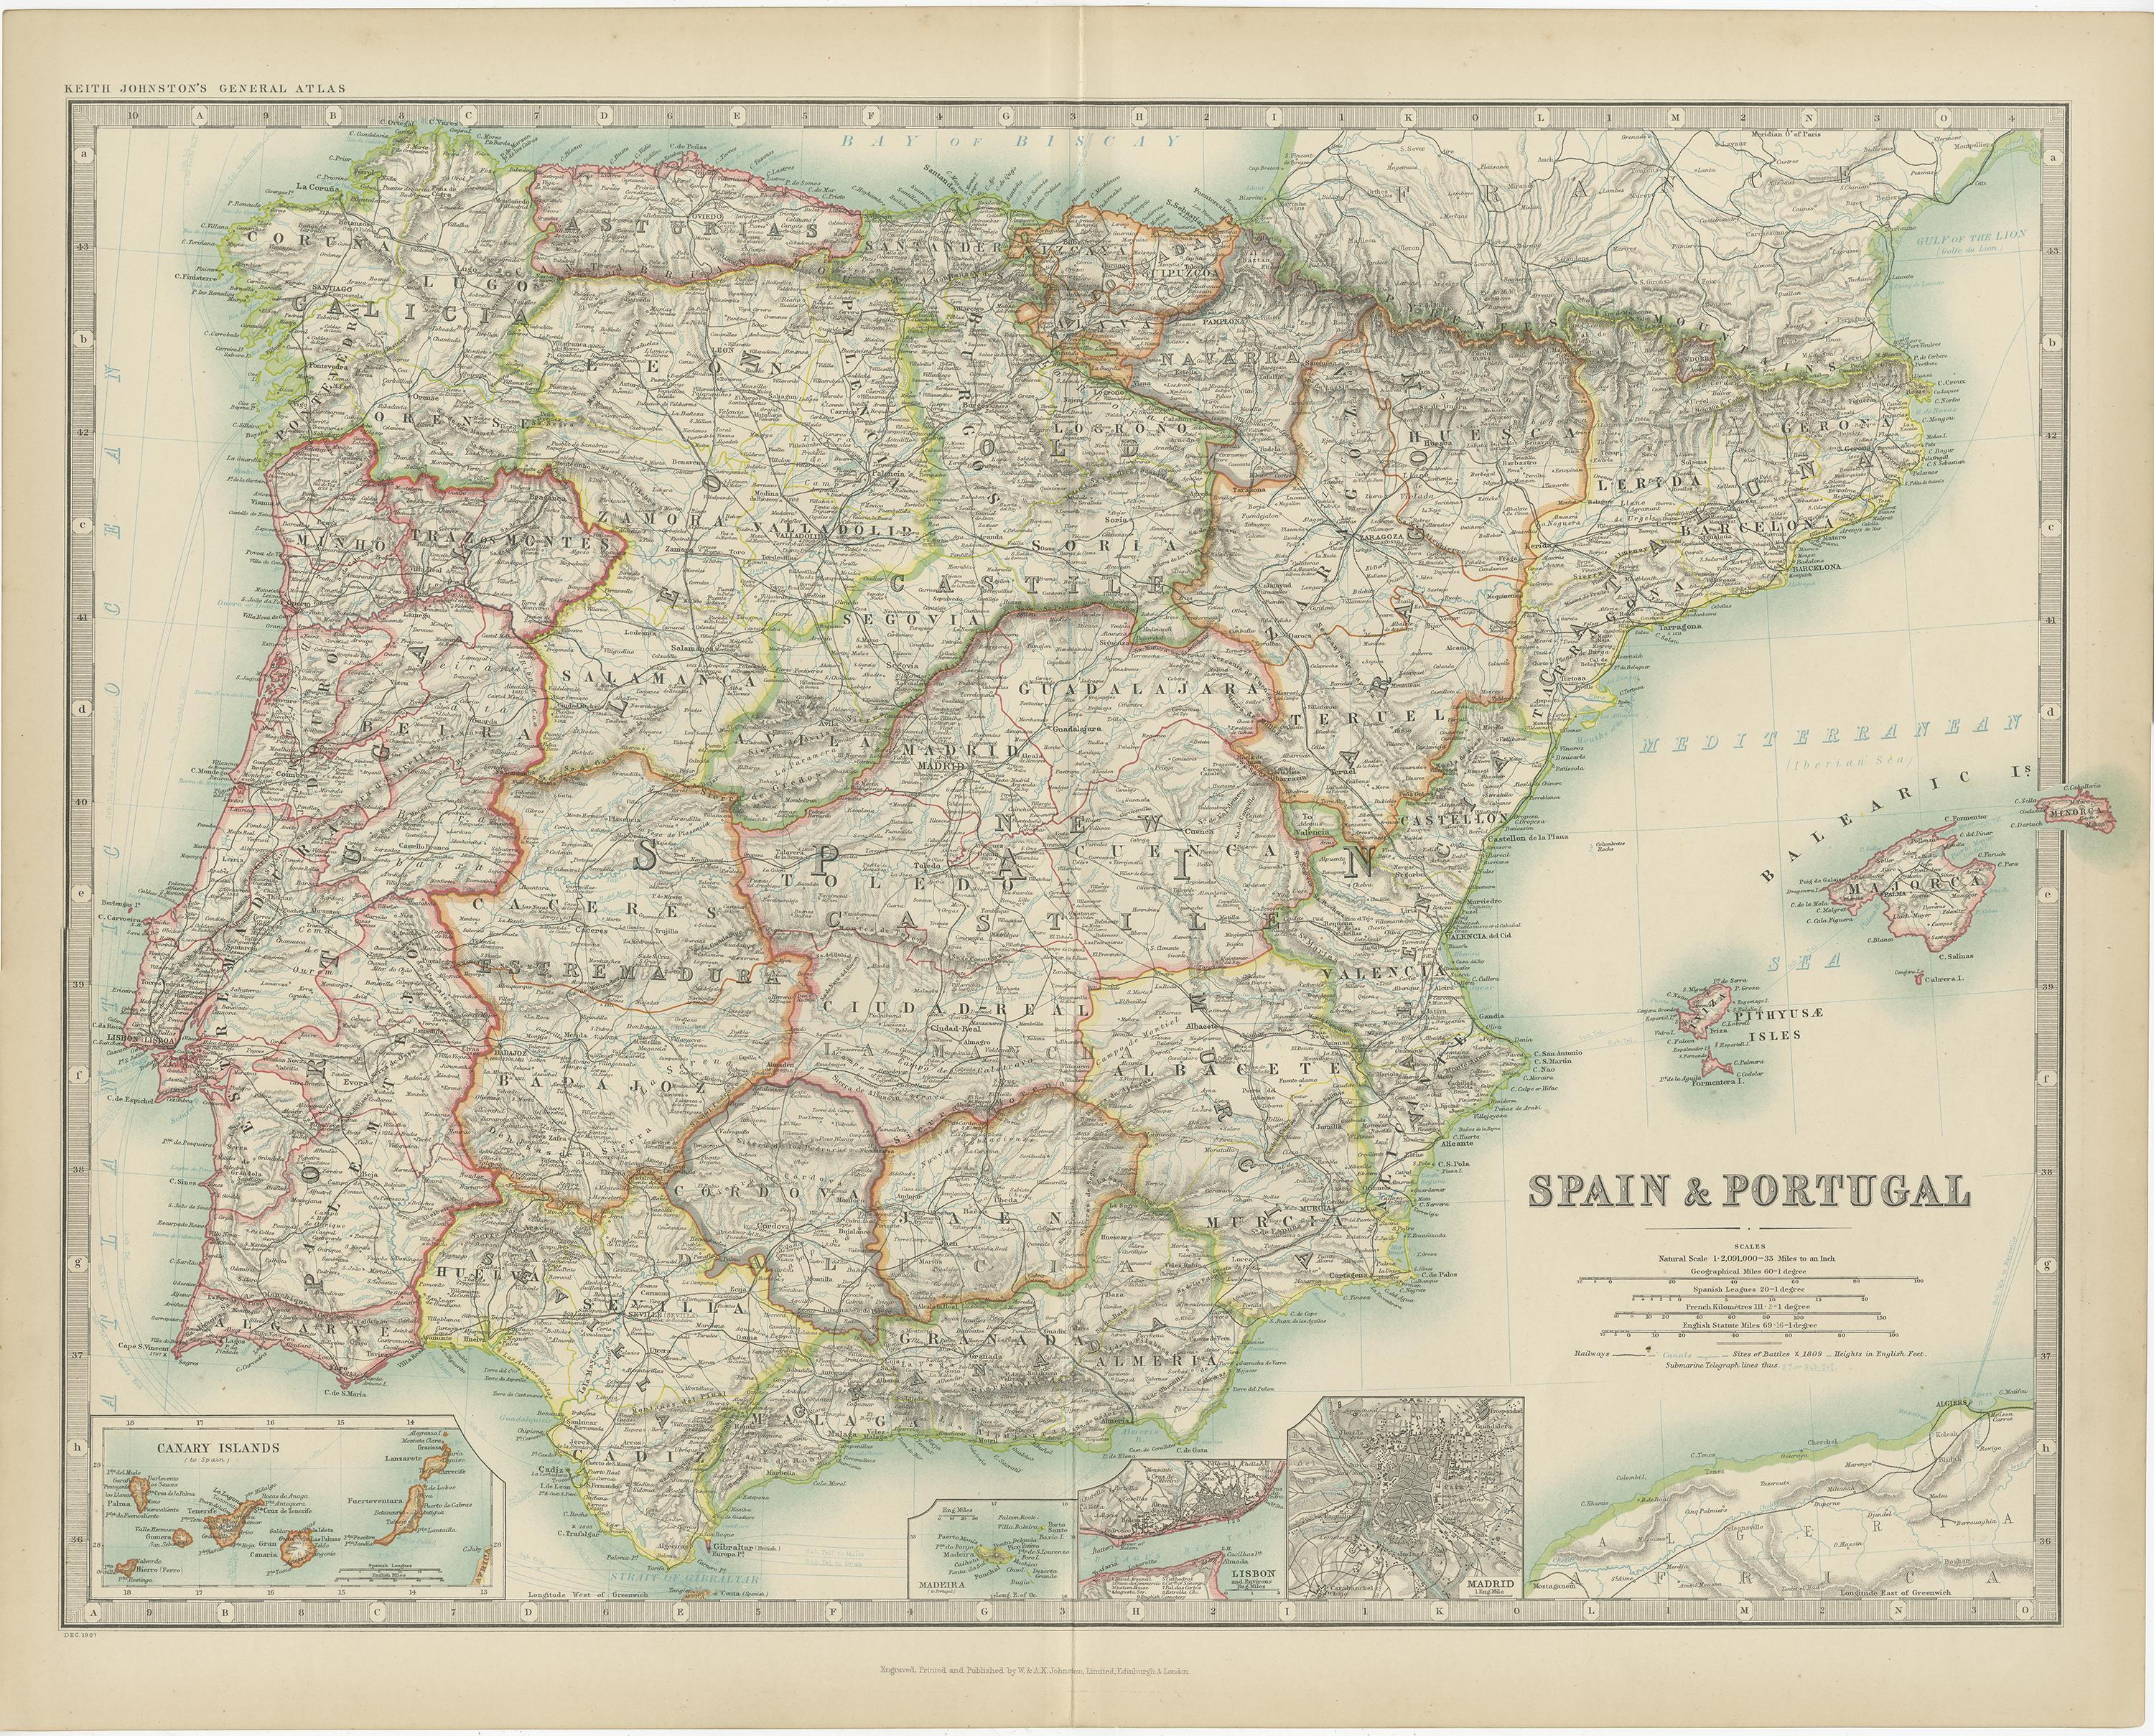 Antique map titled 'Spain and Portugal'. Original antique map of Spain and Portugal. With inset maps of the Canary Islands, Madeira, Lisbon and Madrid. This map originates from the ‘Royal Atlas of Modern Geography’. Published by W. & A.K. Johnston,